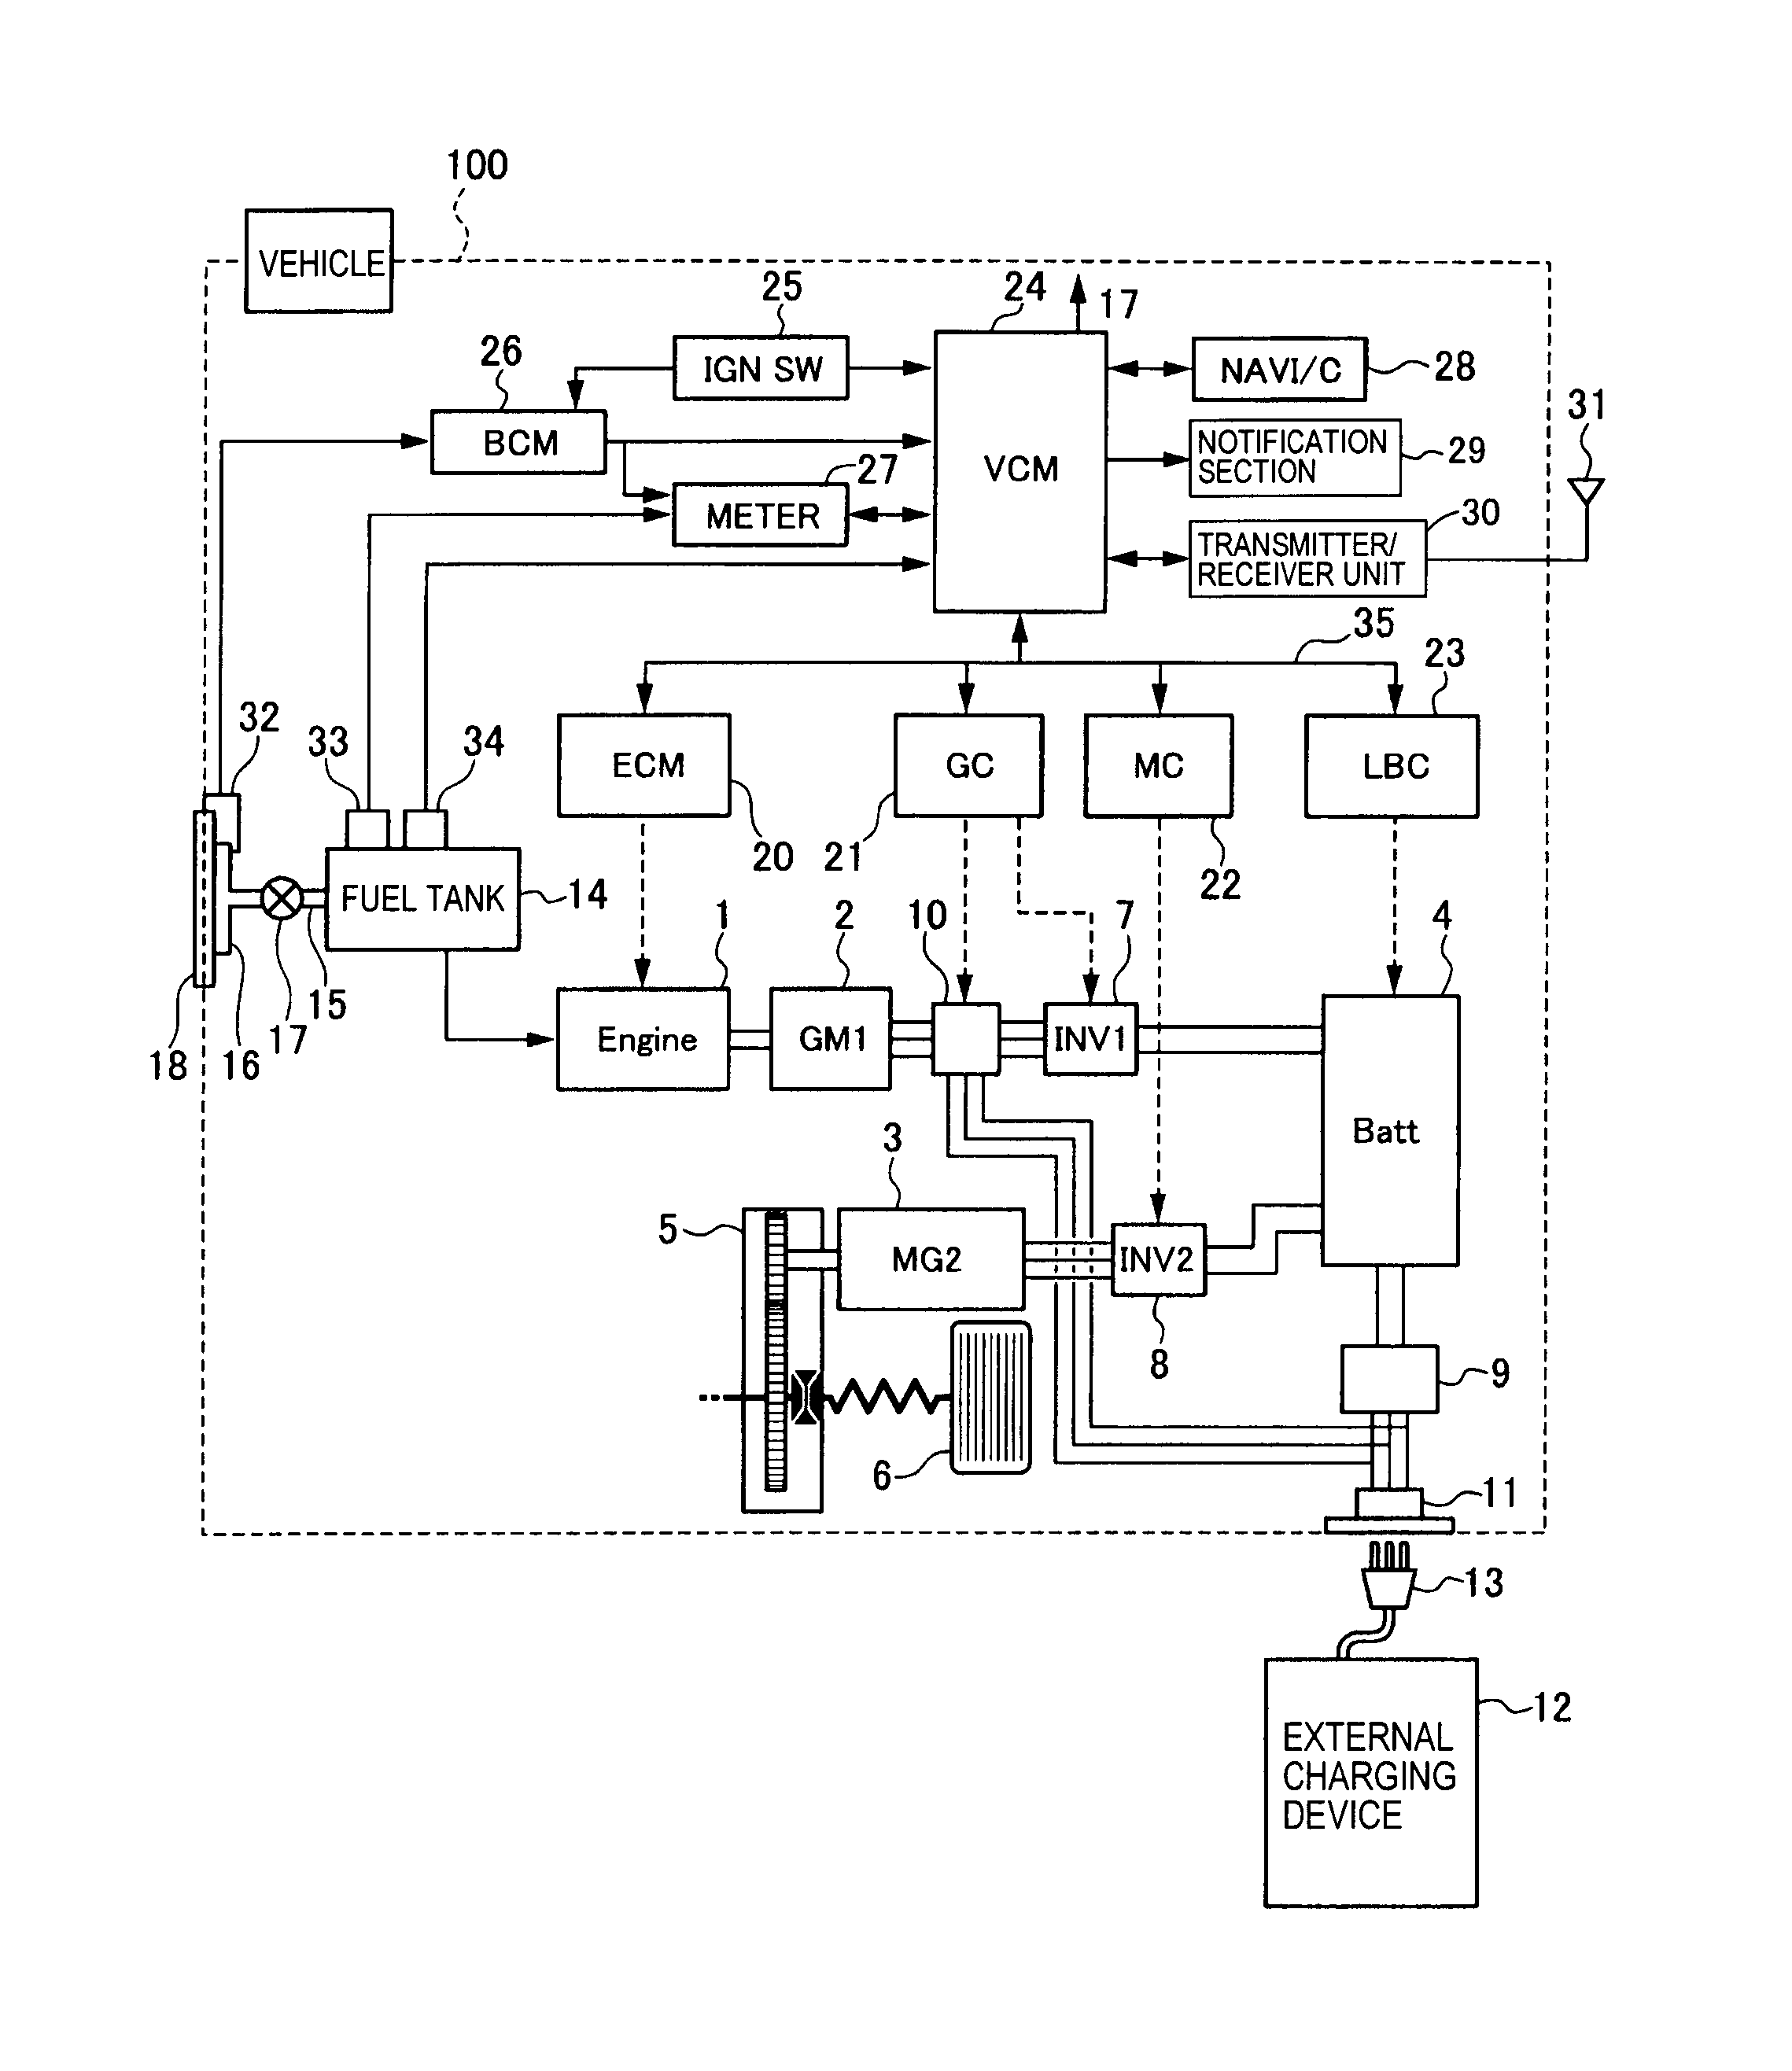 hes 9600-12/24d-630 wiring diagram